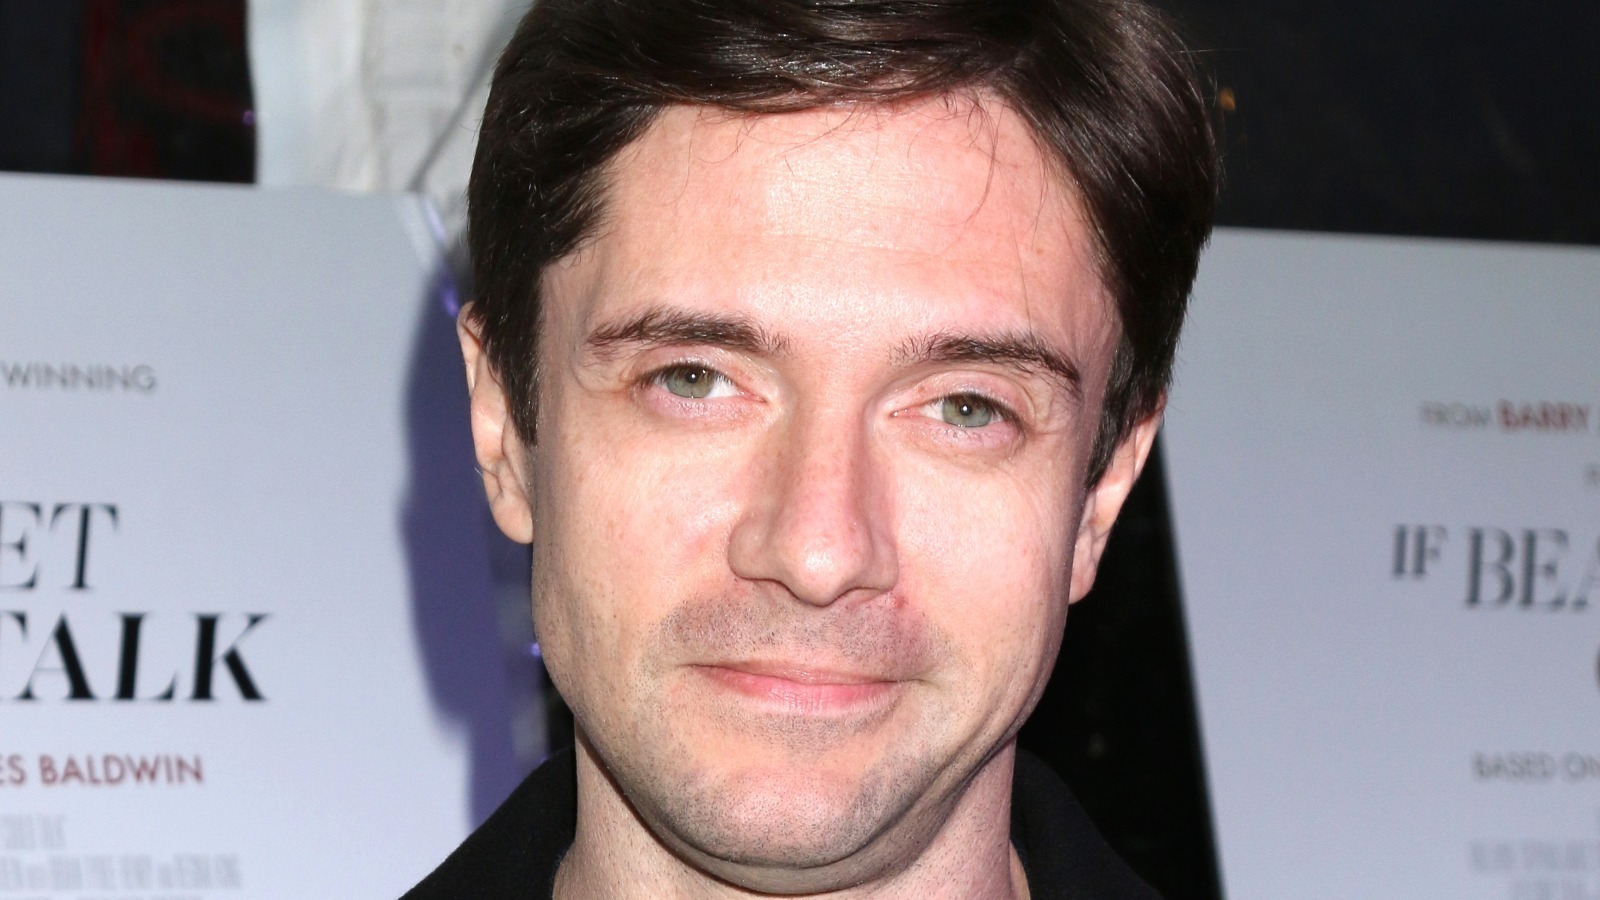 The Superhero Movie That Almost Ruined Topher Grace's Career